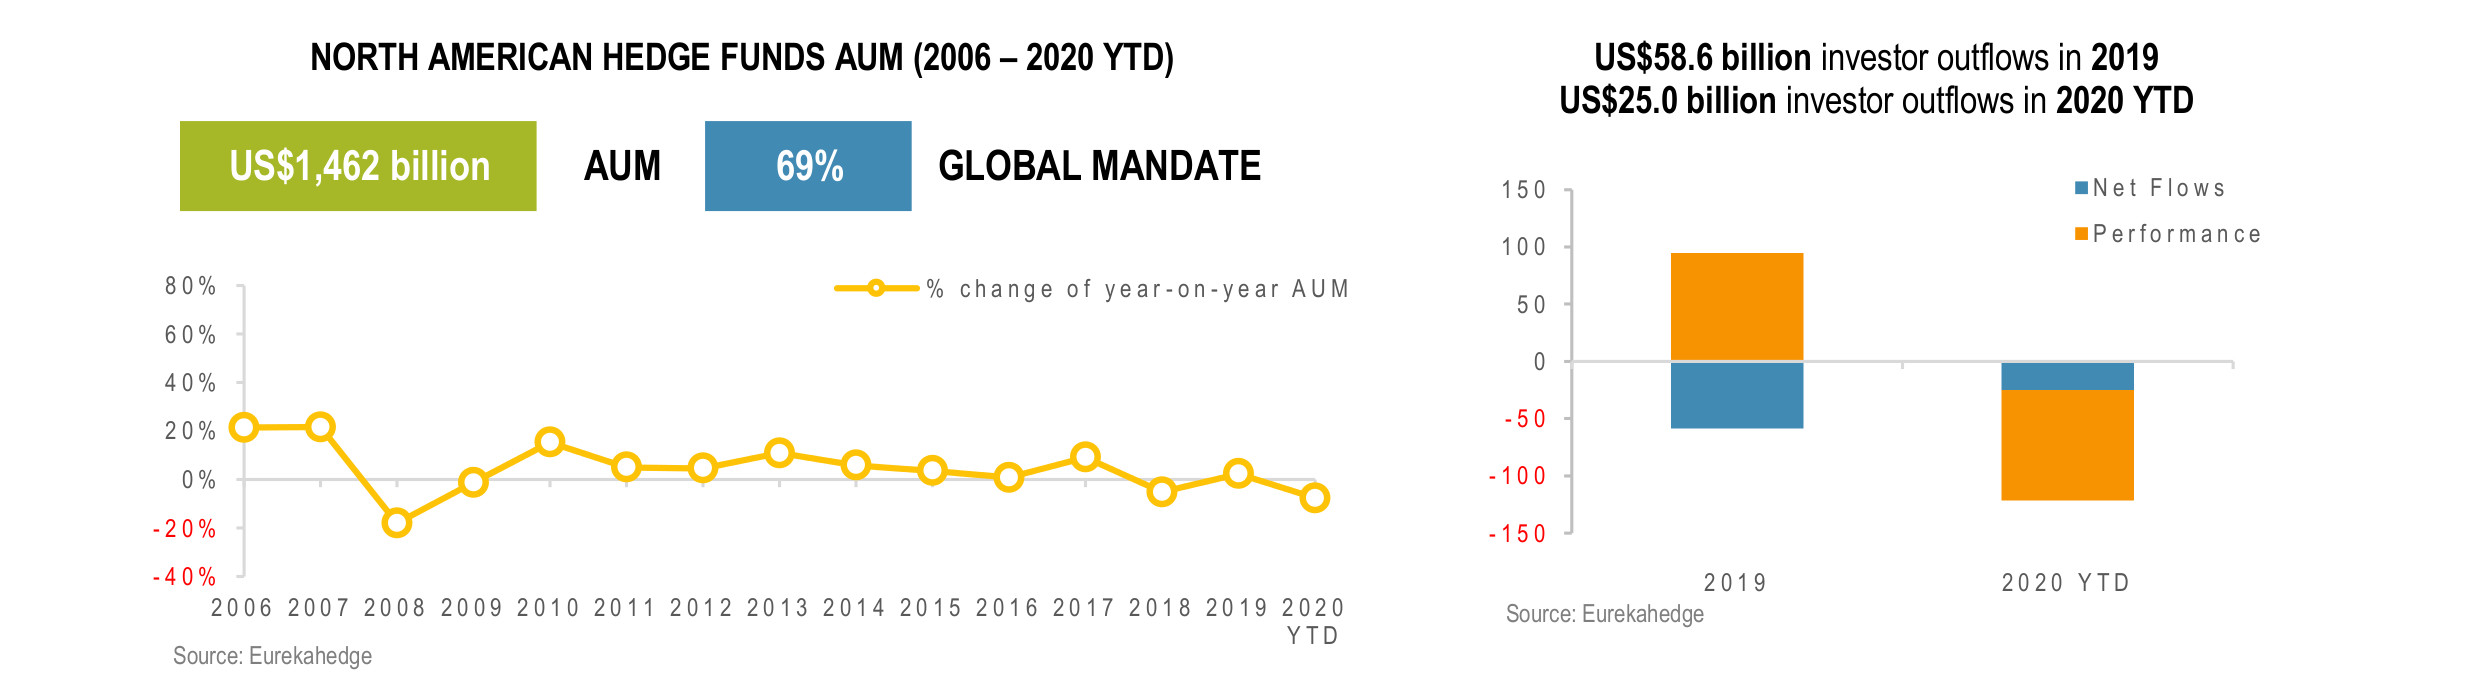 North American Hedge Funds Infographic May 2020 - AUM